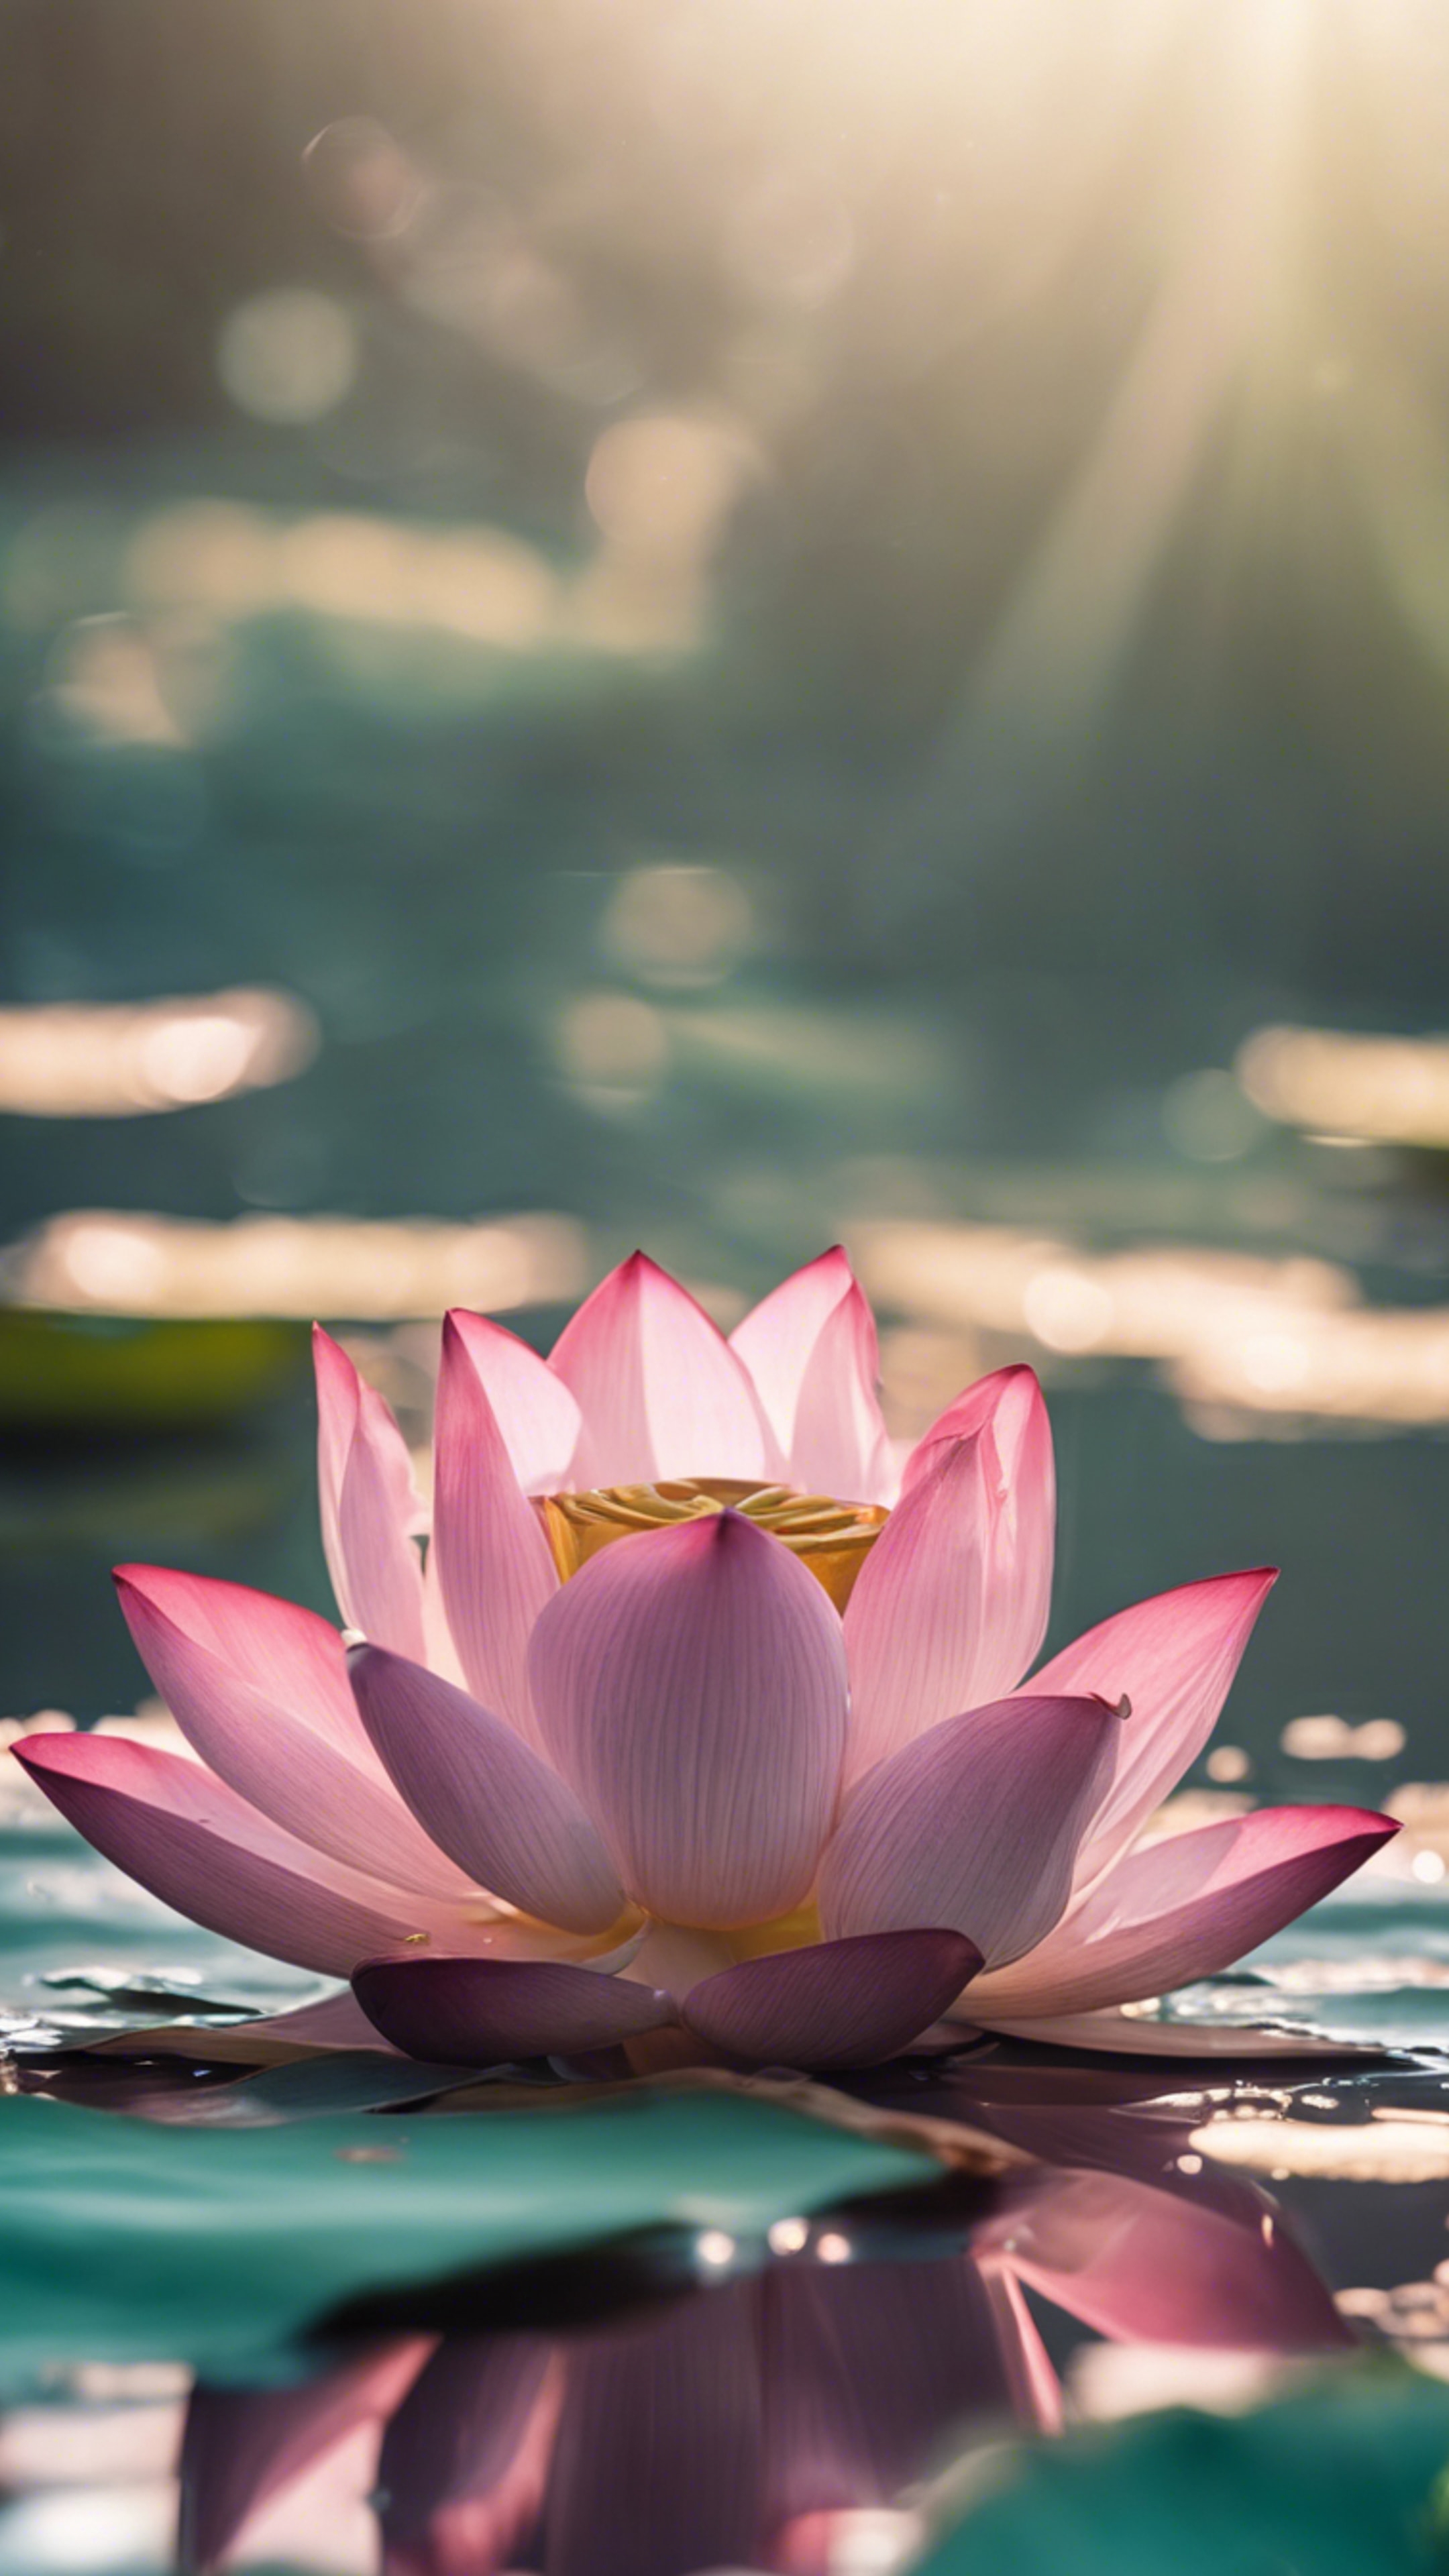 A close-up image of a single blooming lotus on a clear pond. Обои[056d411e4bd14d9f8d69]